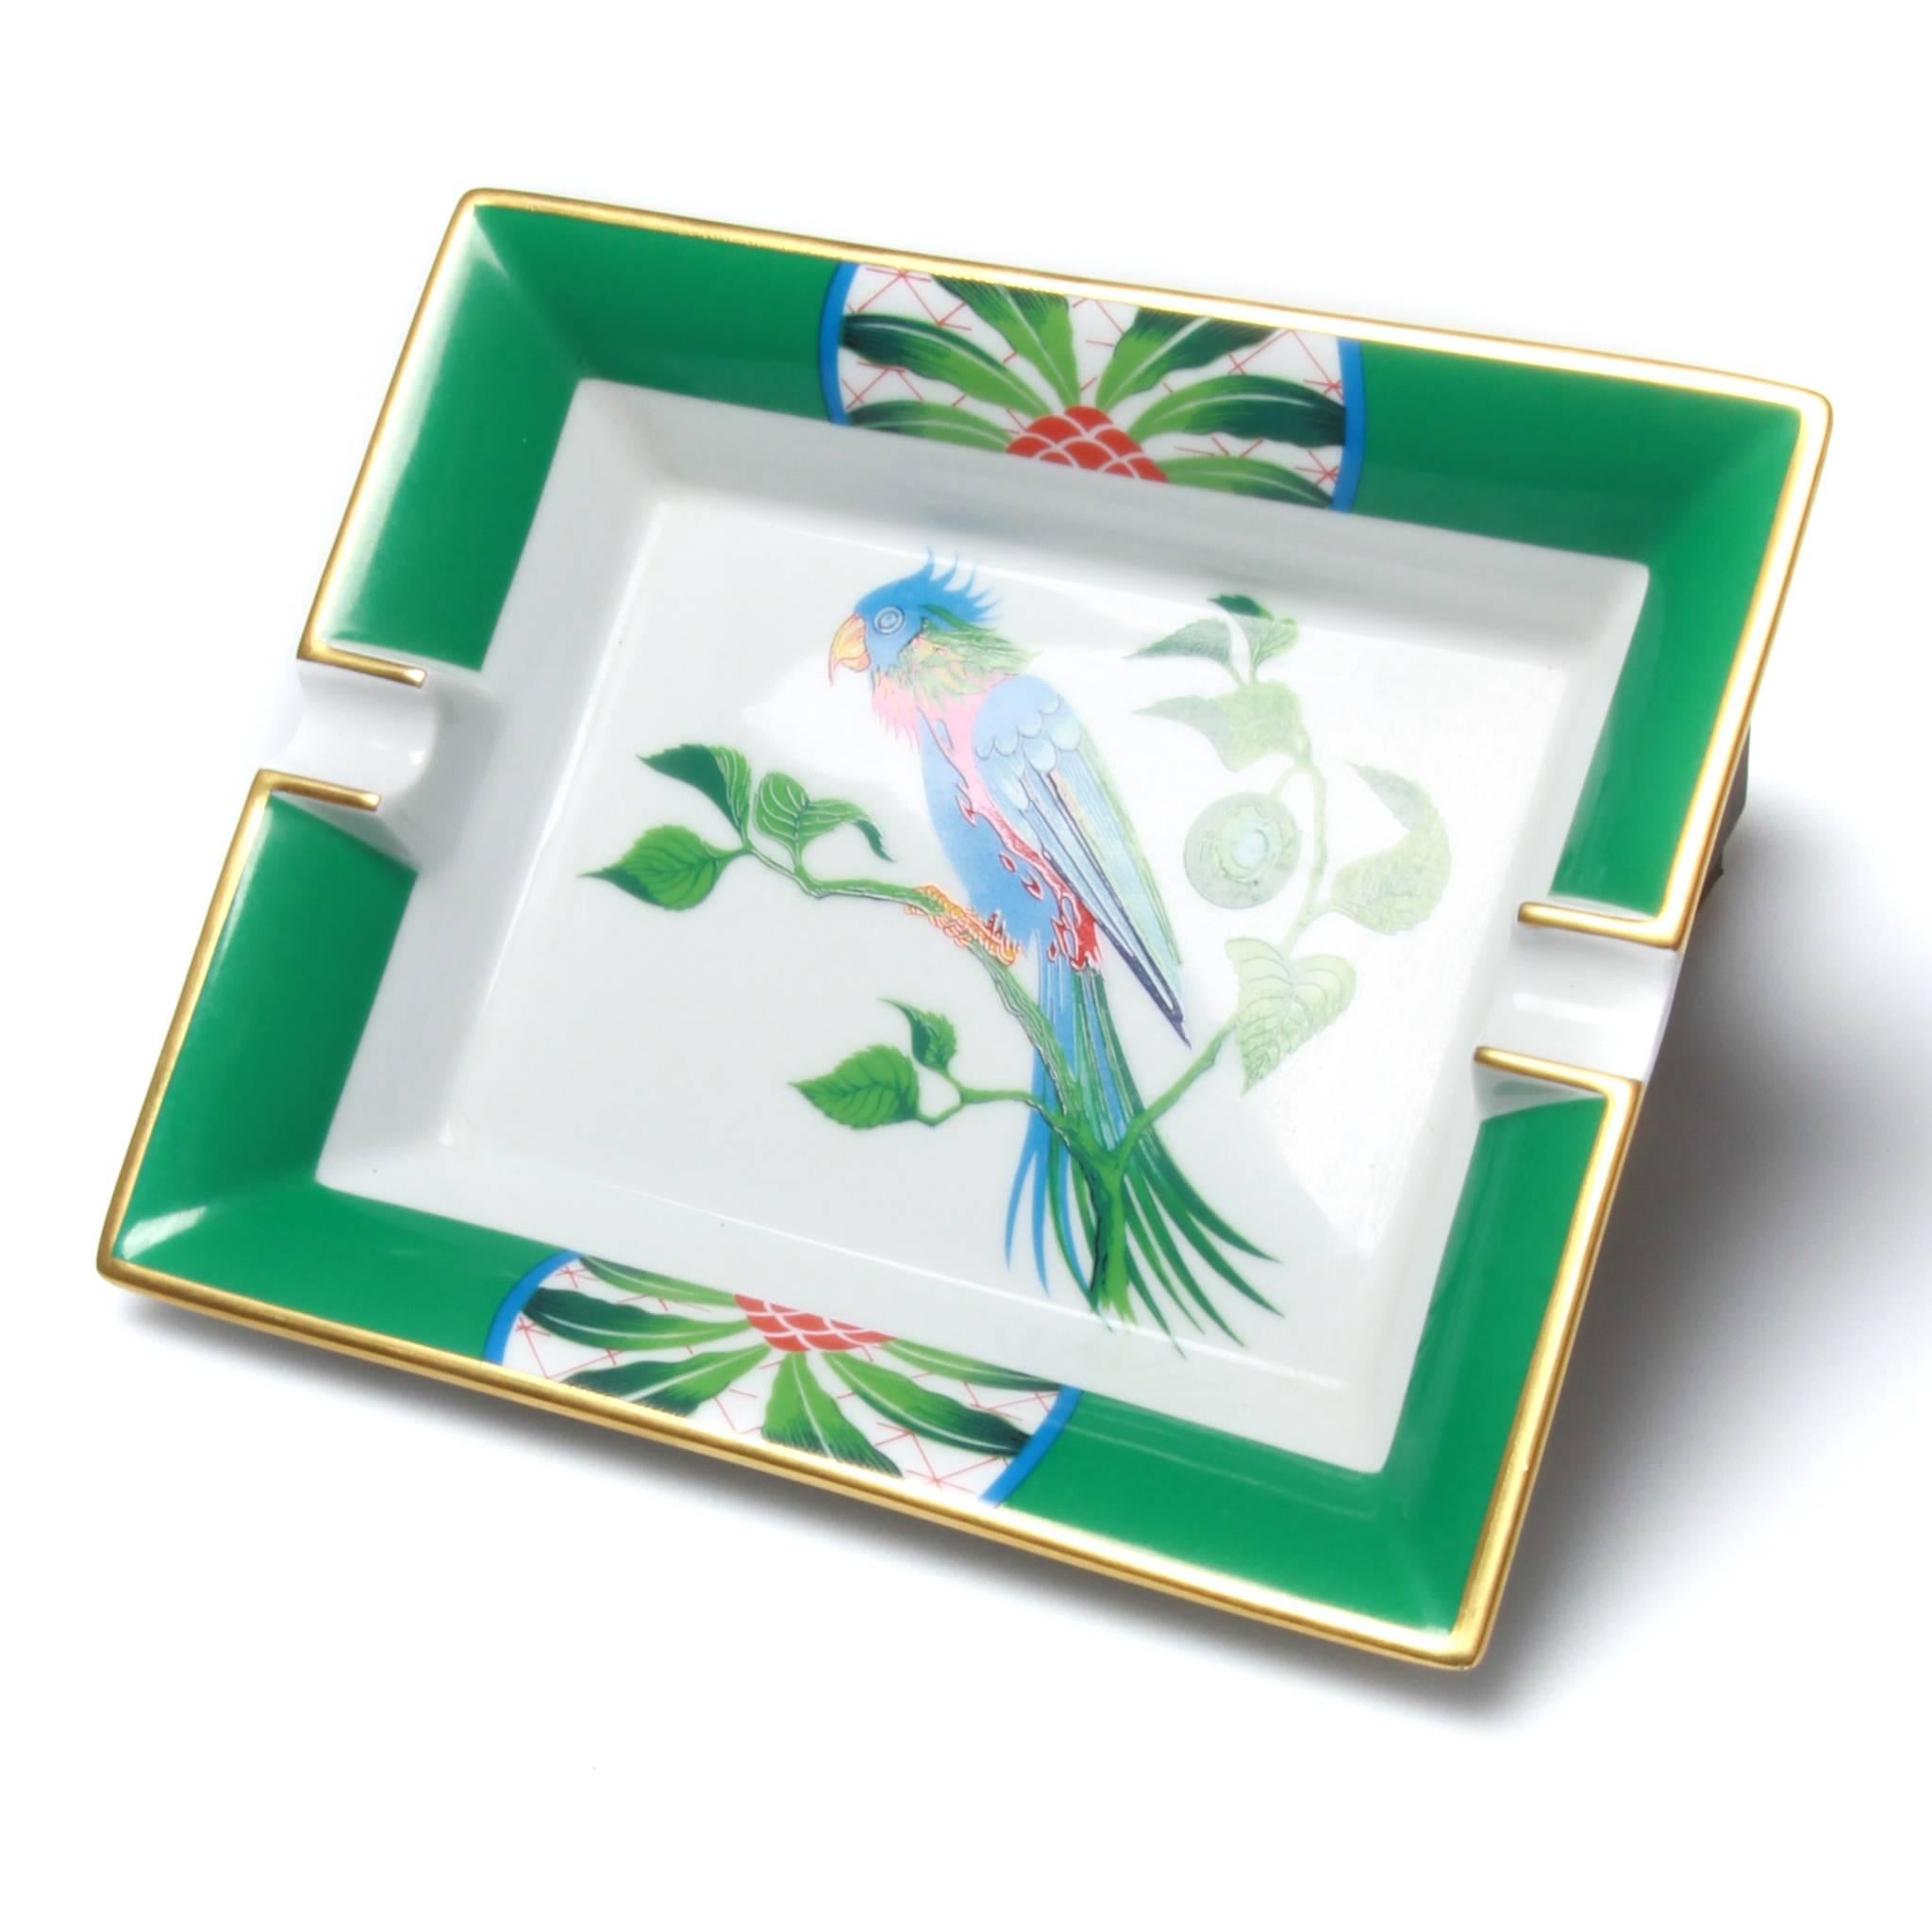 Hermes ashtray featuring a parrot agaisnt a green and white ground. Natural suede base and Hermes Paris printed on bottom.  